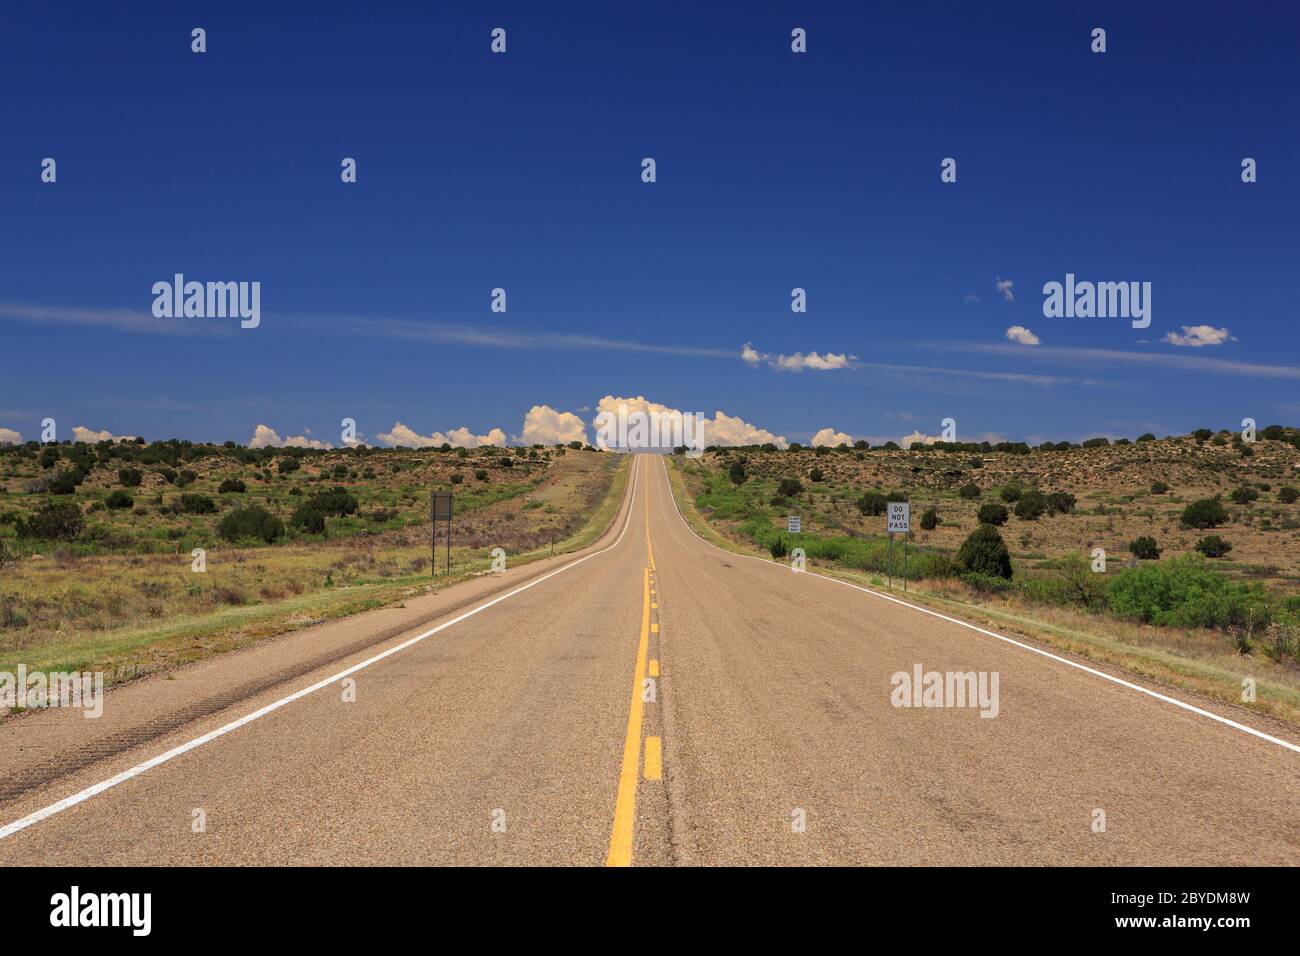 View looking Southwest on US-54, Santa Rosa, New Mexico, United States of America Stock Photo